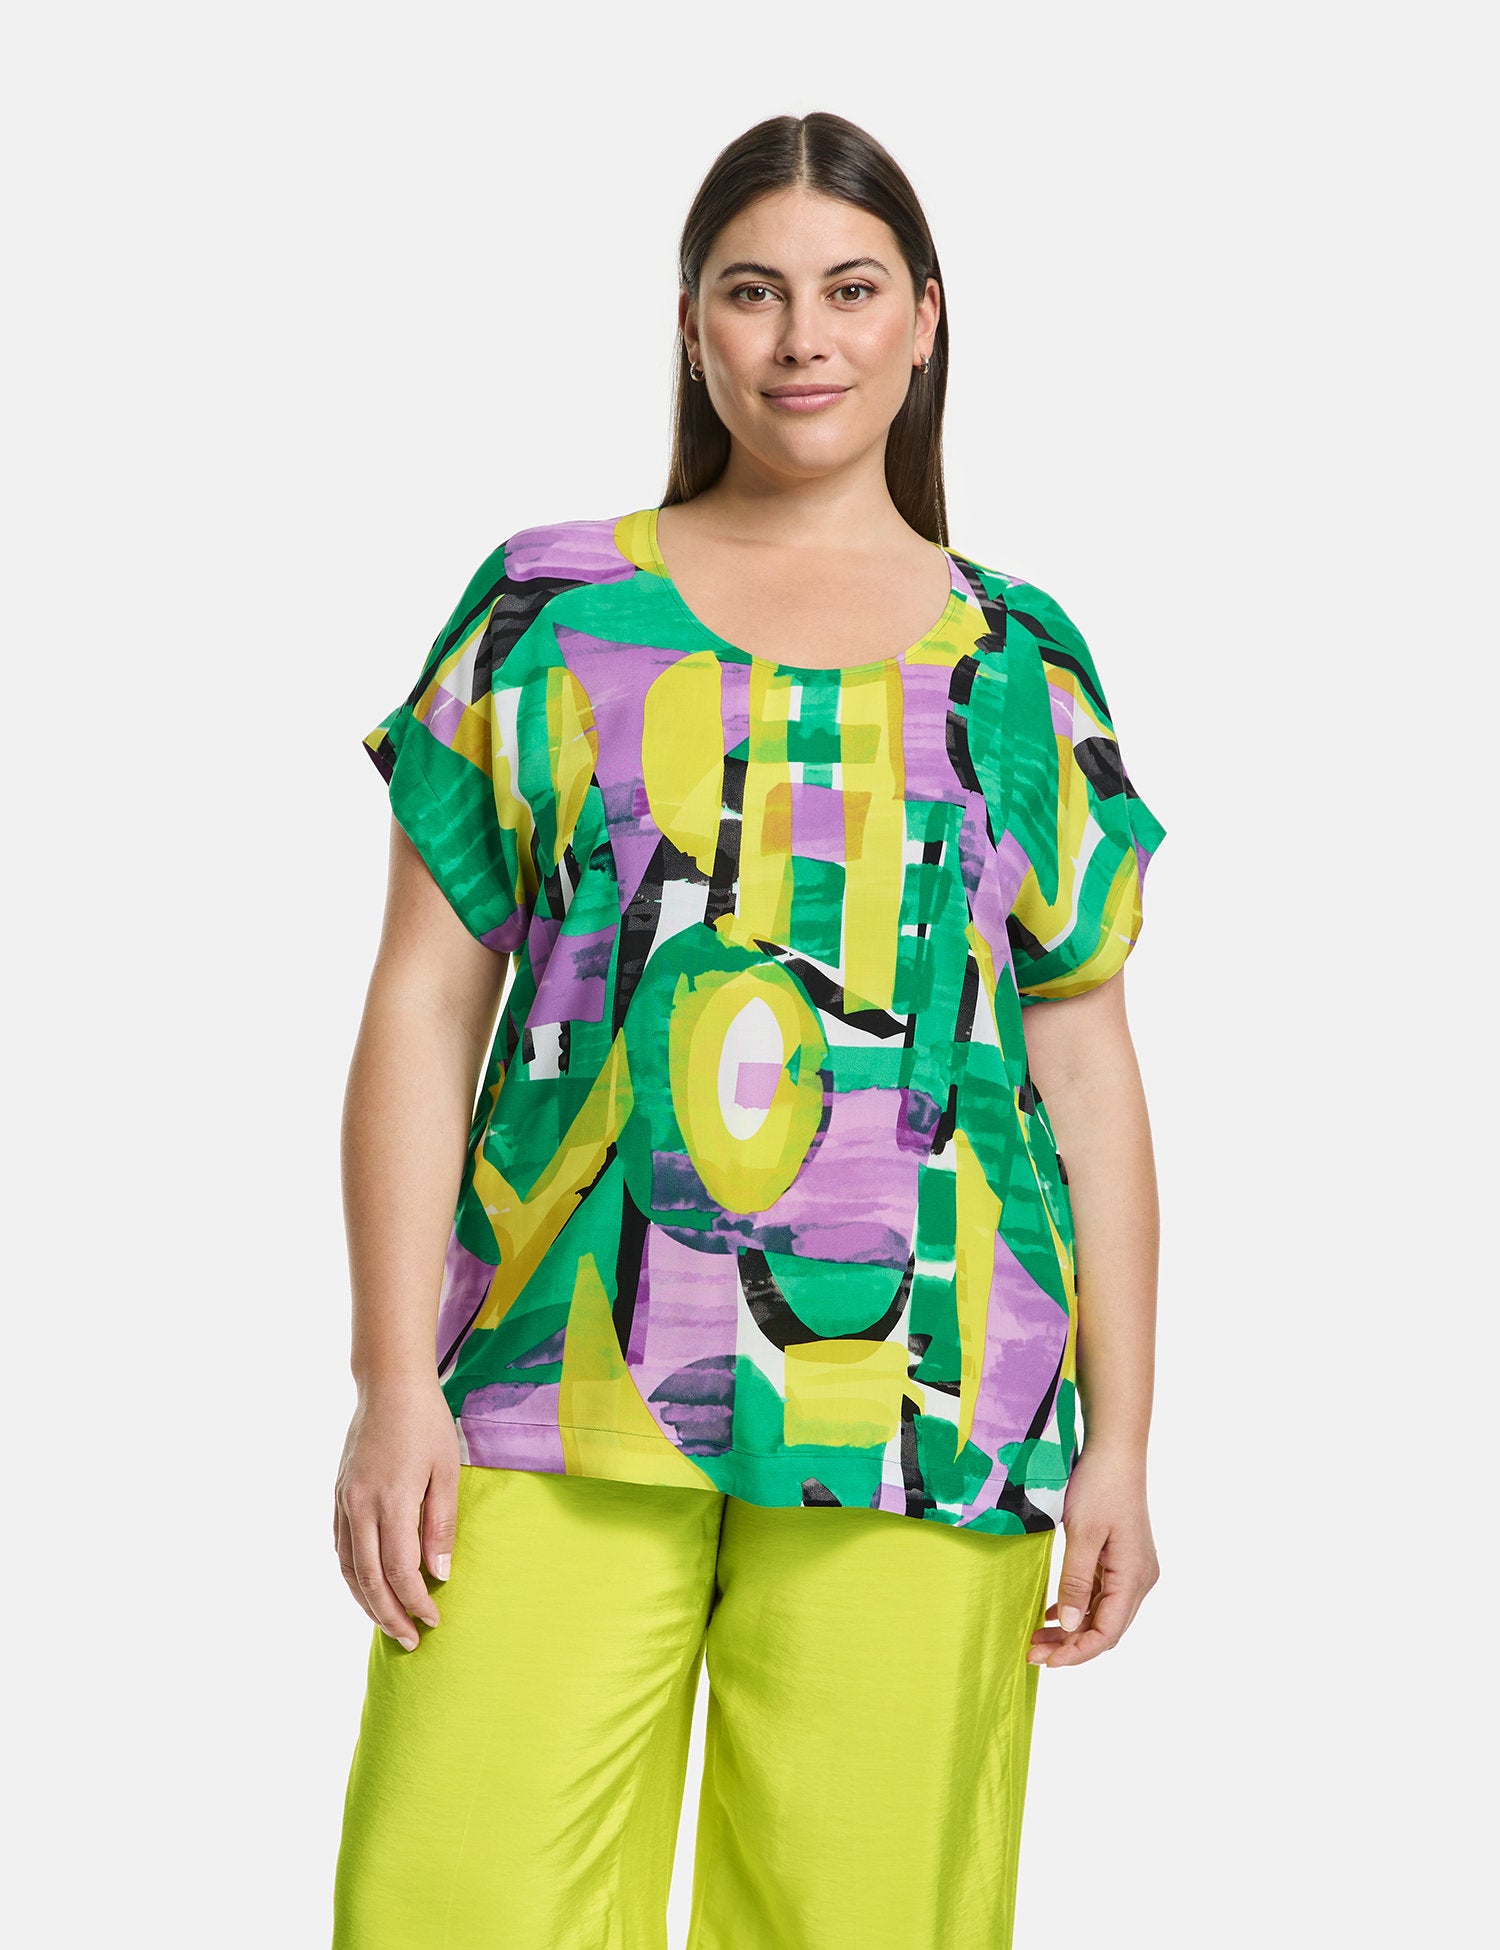 Blouse Top With A Colourful Print_460047-21064_5602_04